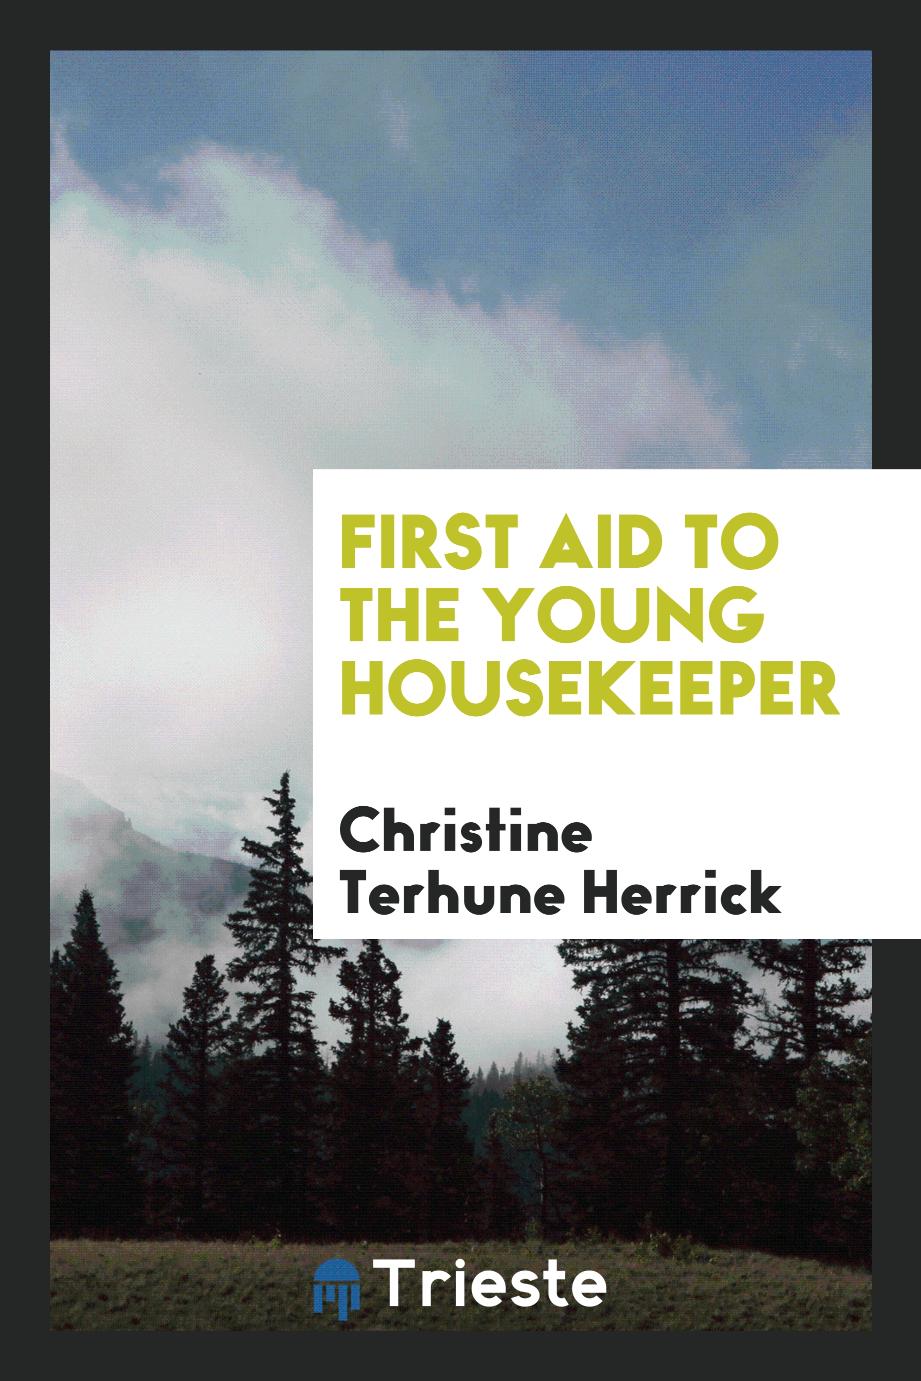 First Aid to the Young Housekeeper